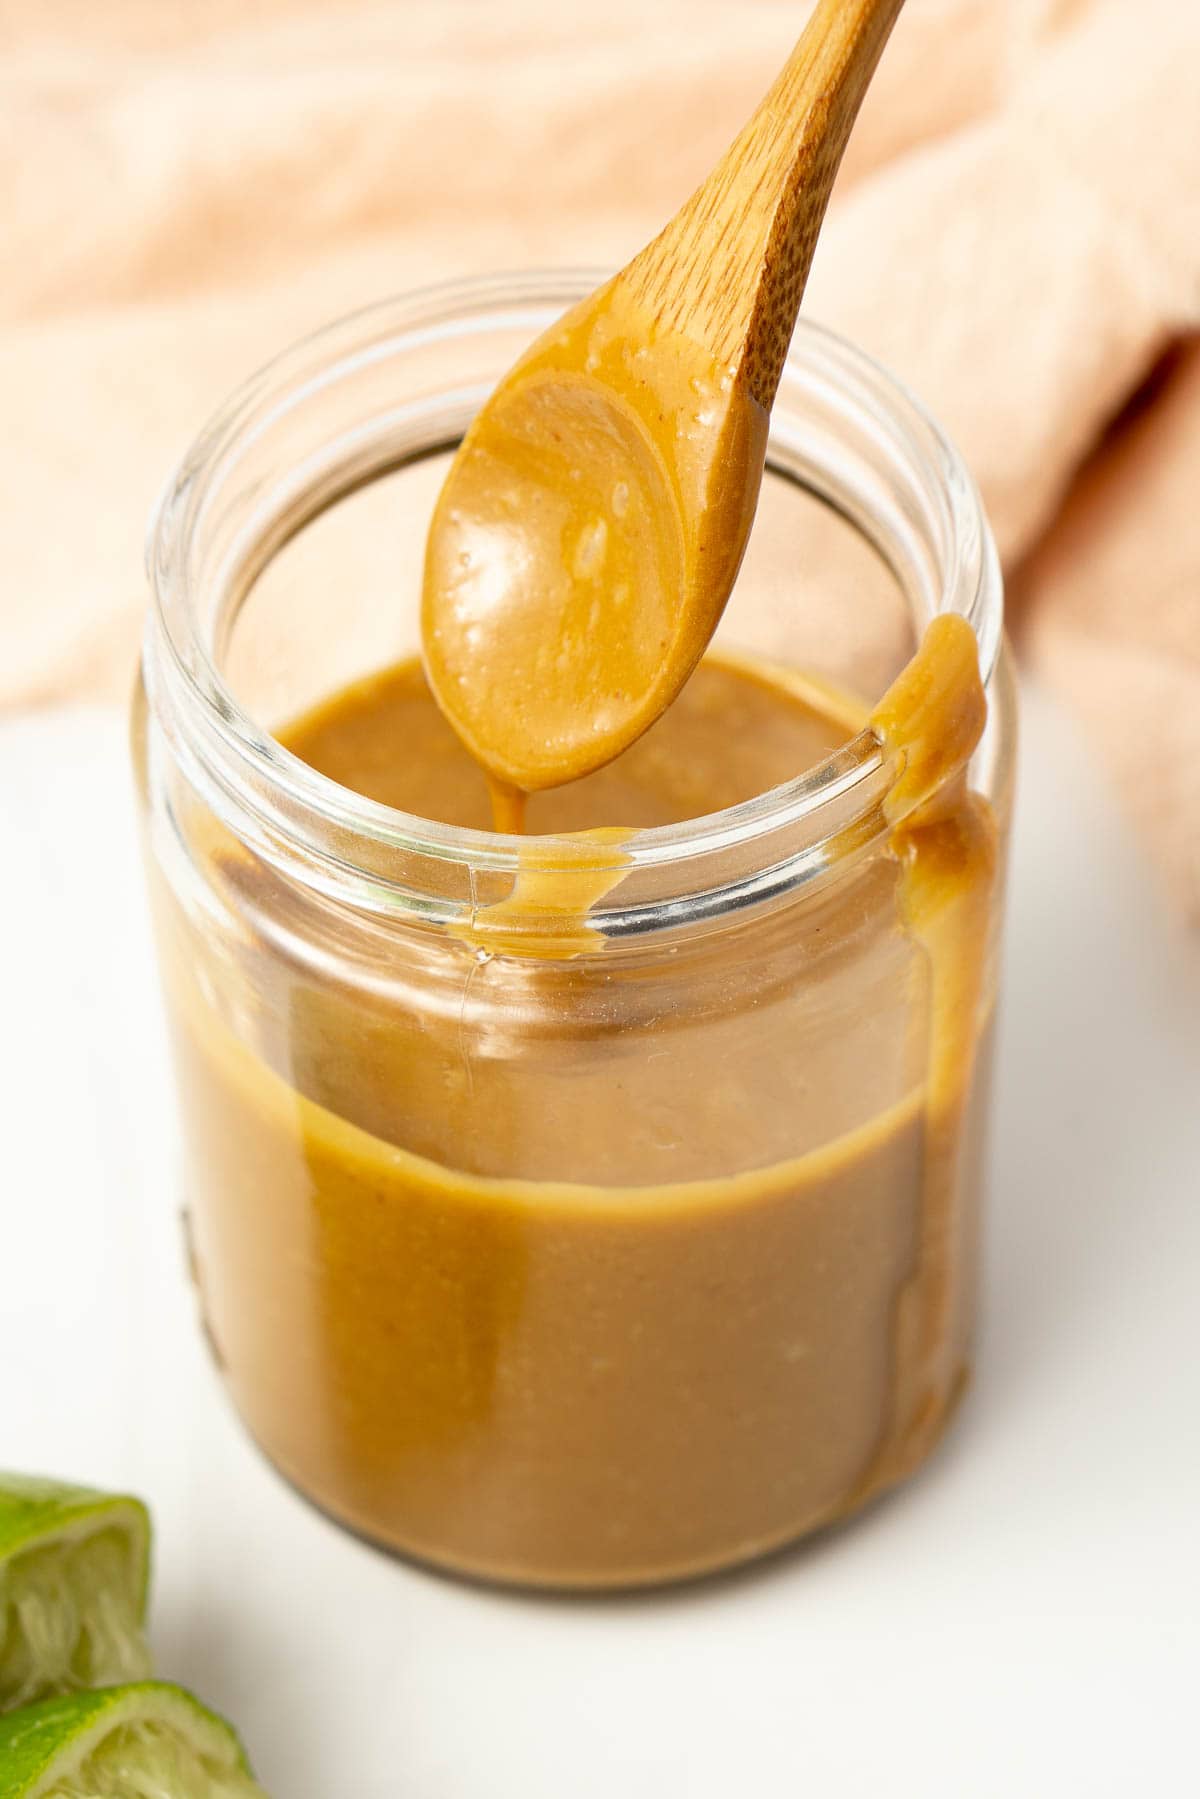 Peanut sauce in a glass jar with a spoon.